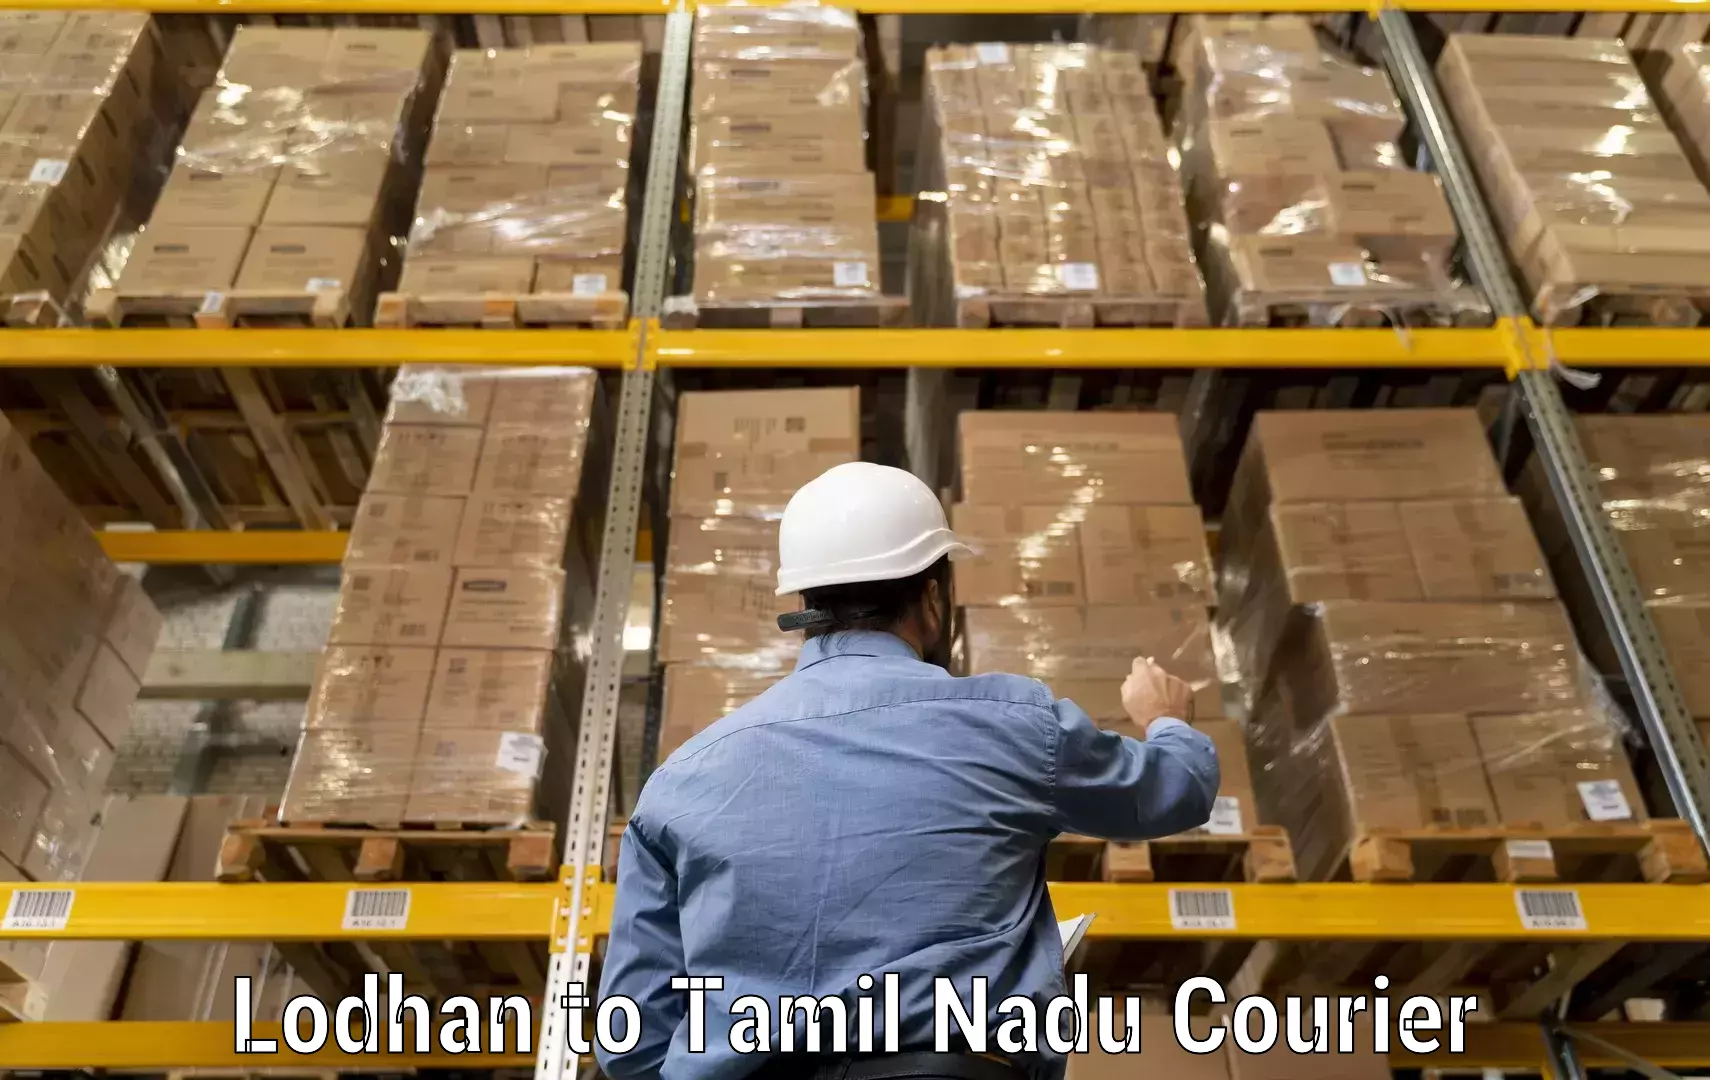 International courier rates Lodhan to Ennore Port Chennai